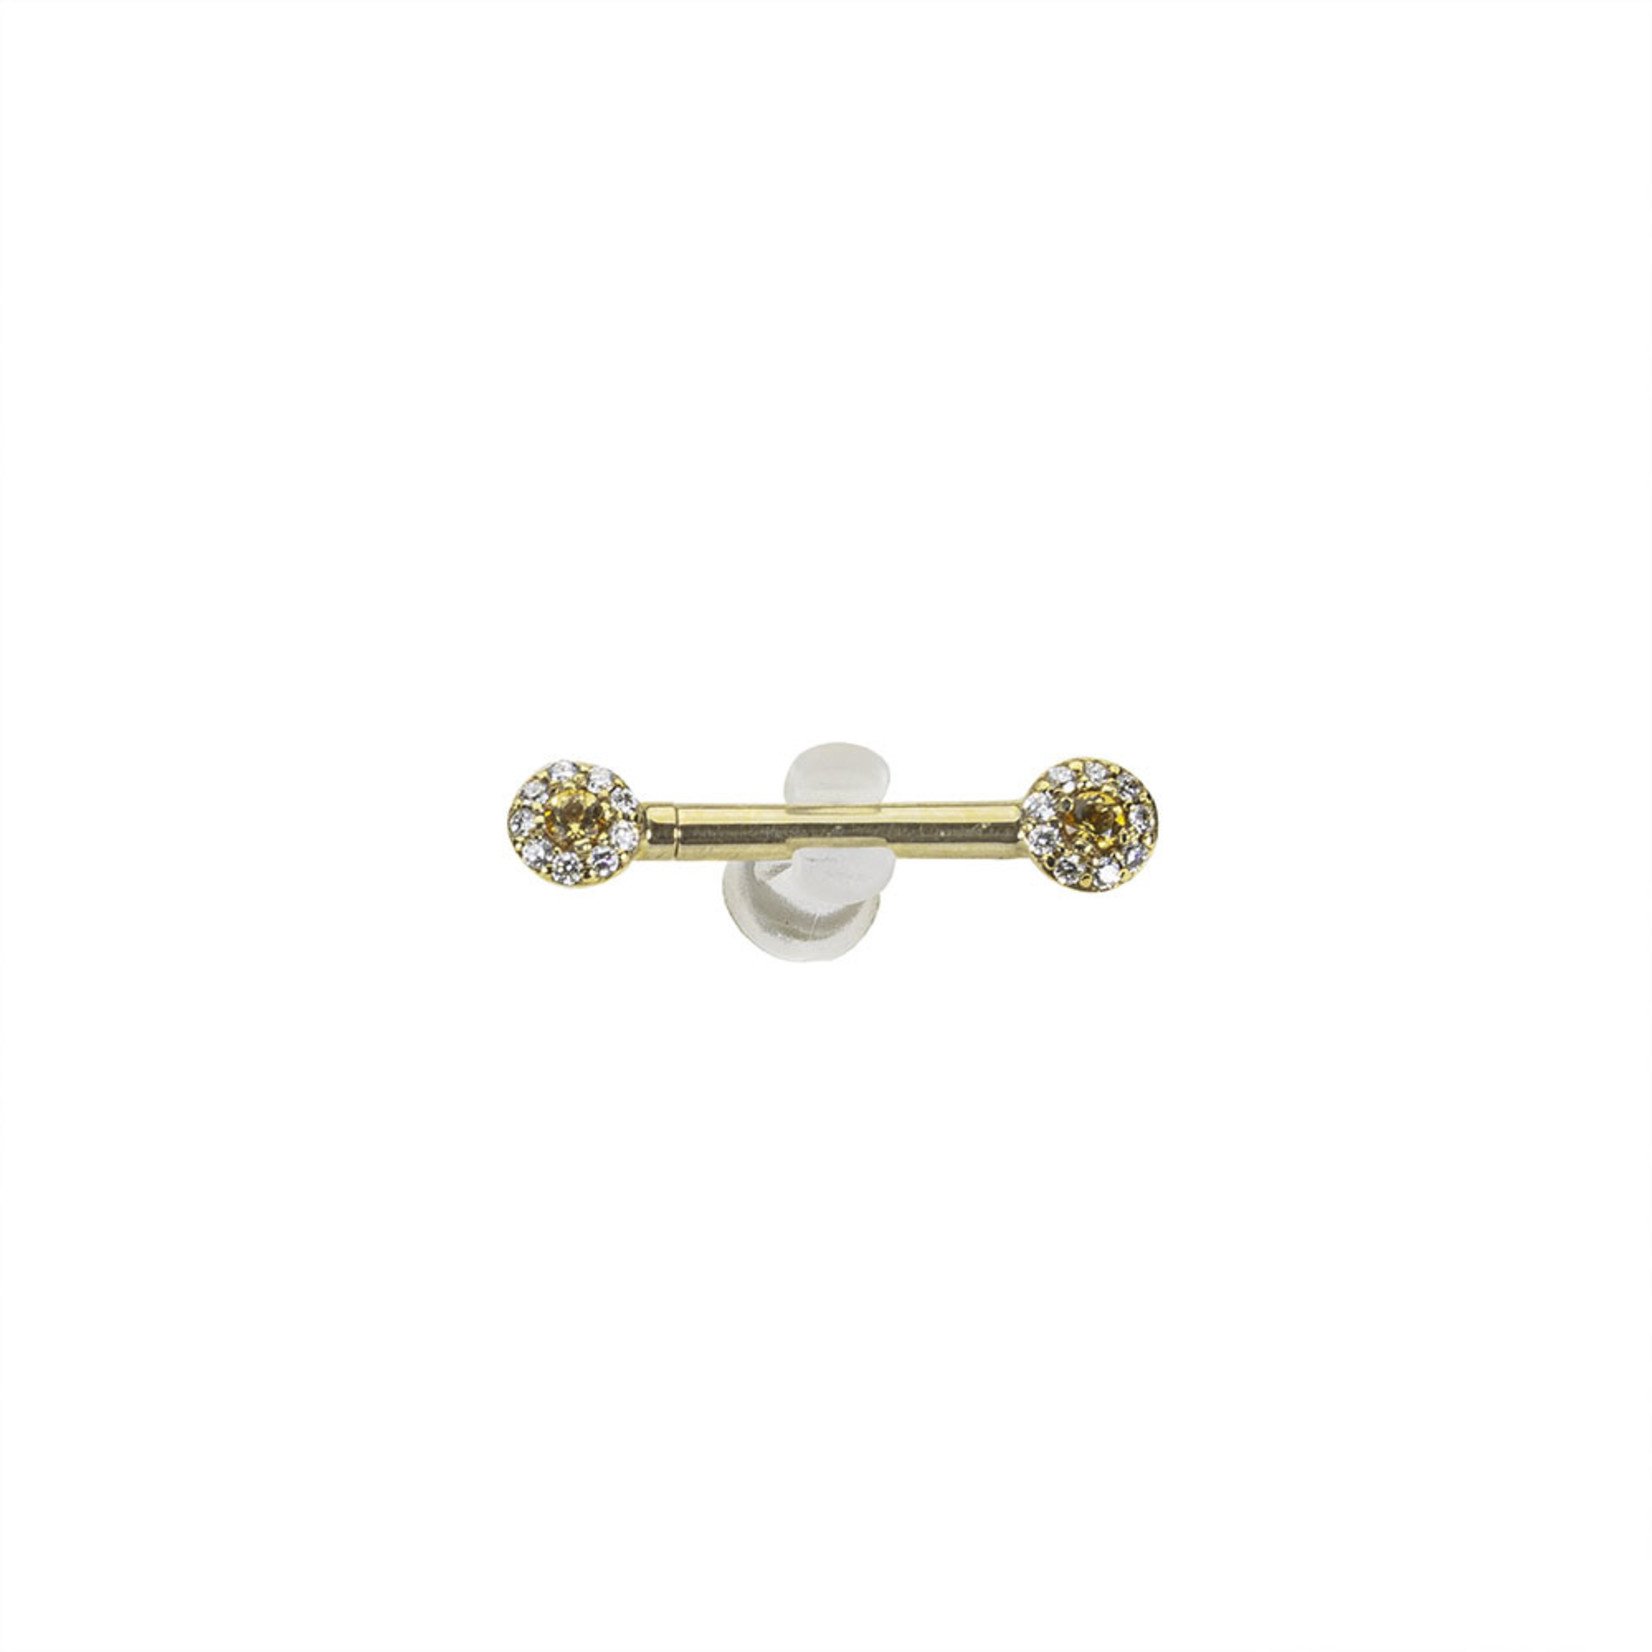 BVLA BVLA 12g 1/2 yellow gold "Altura" nipple barbell. Each barbell has 18 x 1.0 VS1 diamonds surrounding  2x 3.0 AA citrine. Sold as a pair.